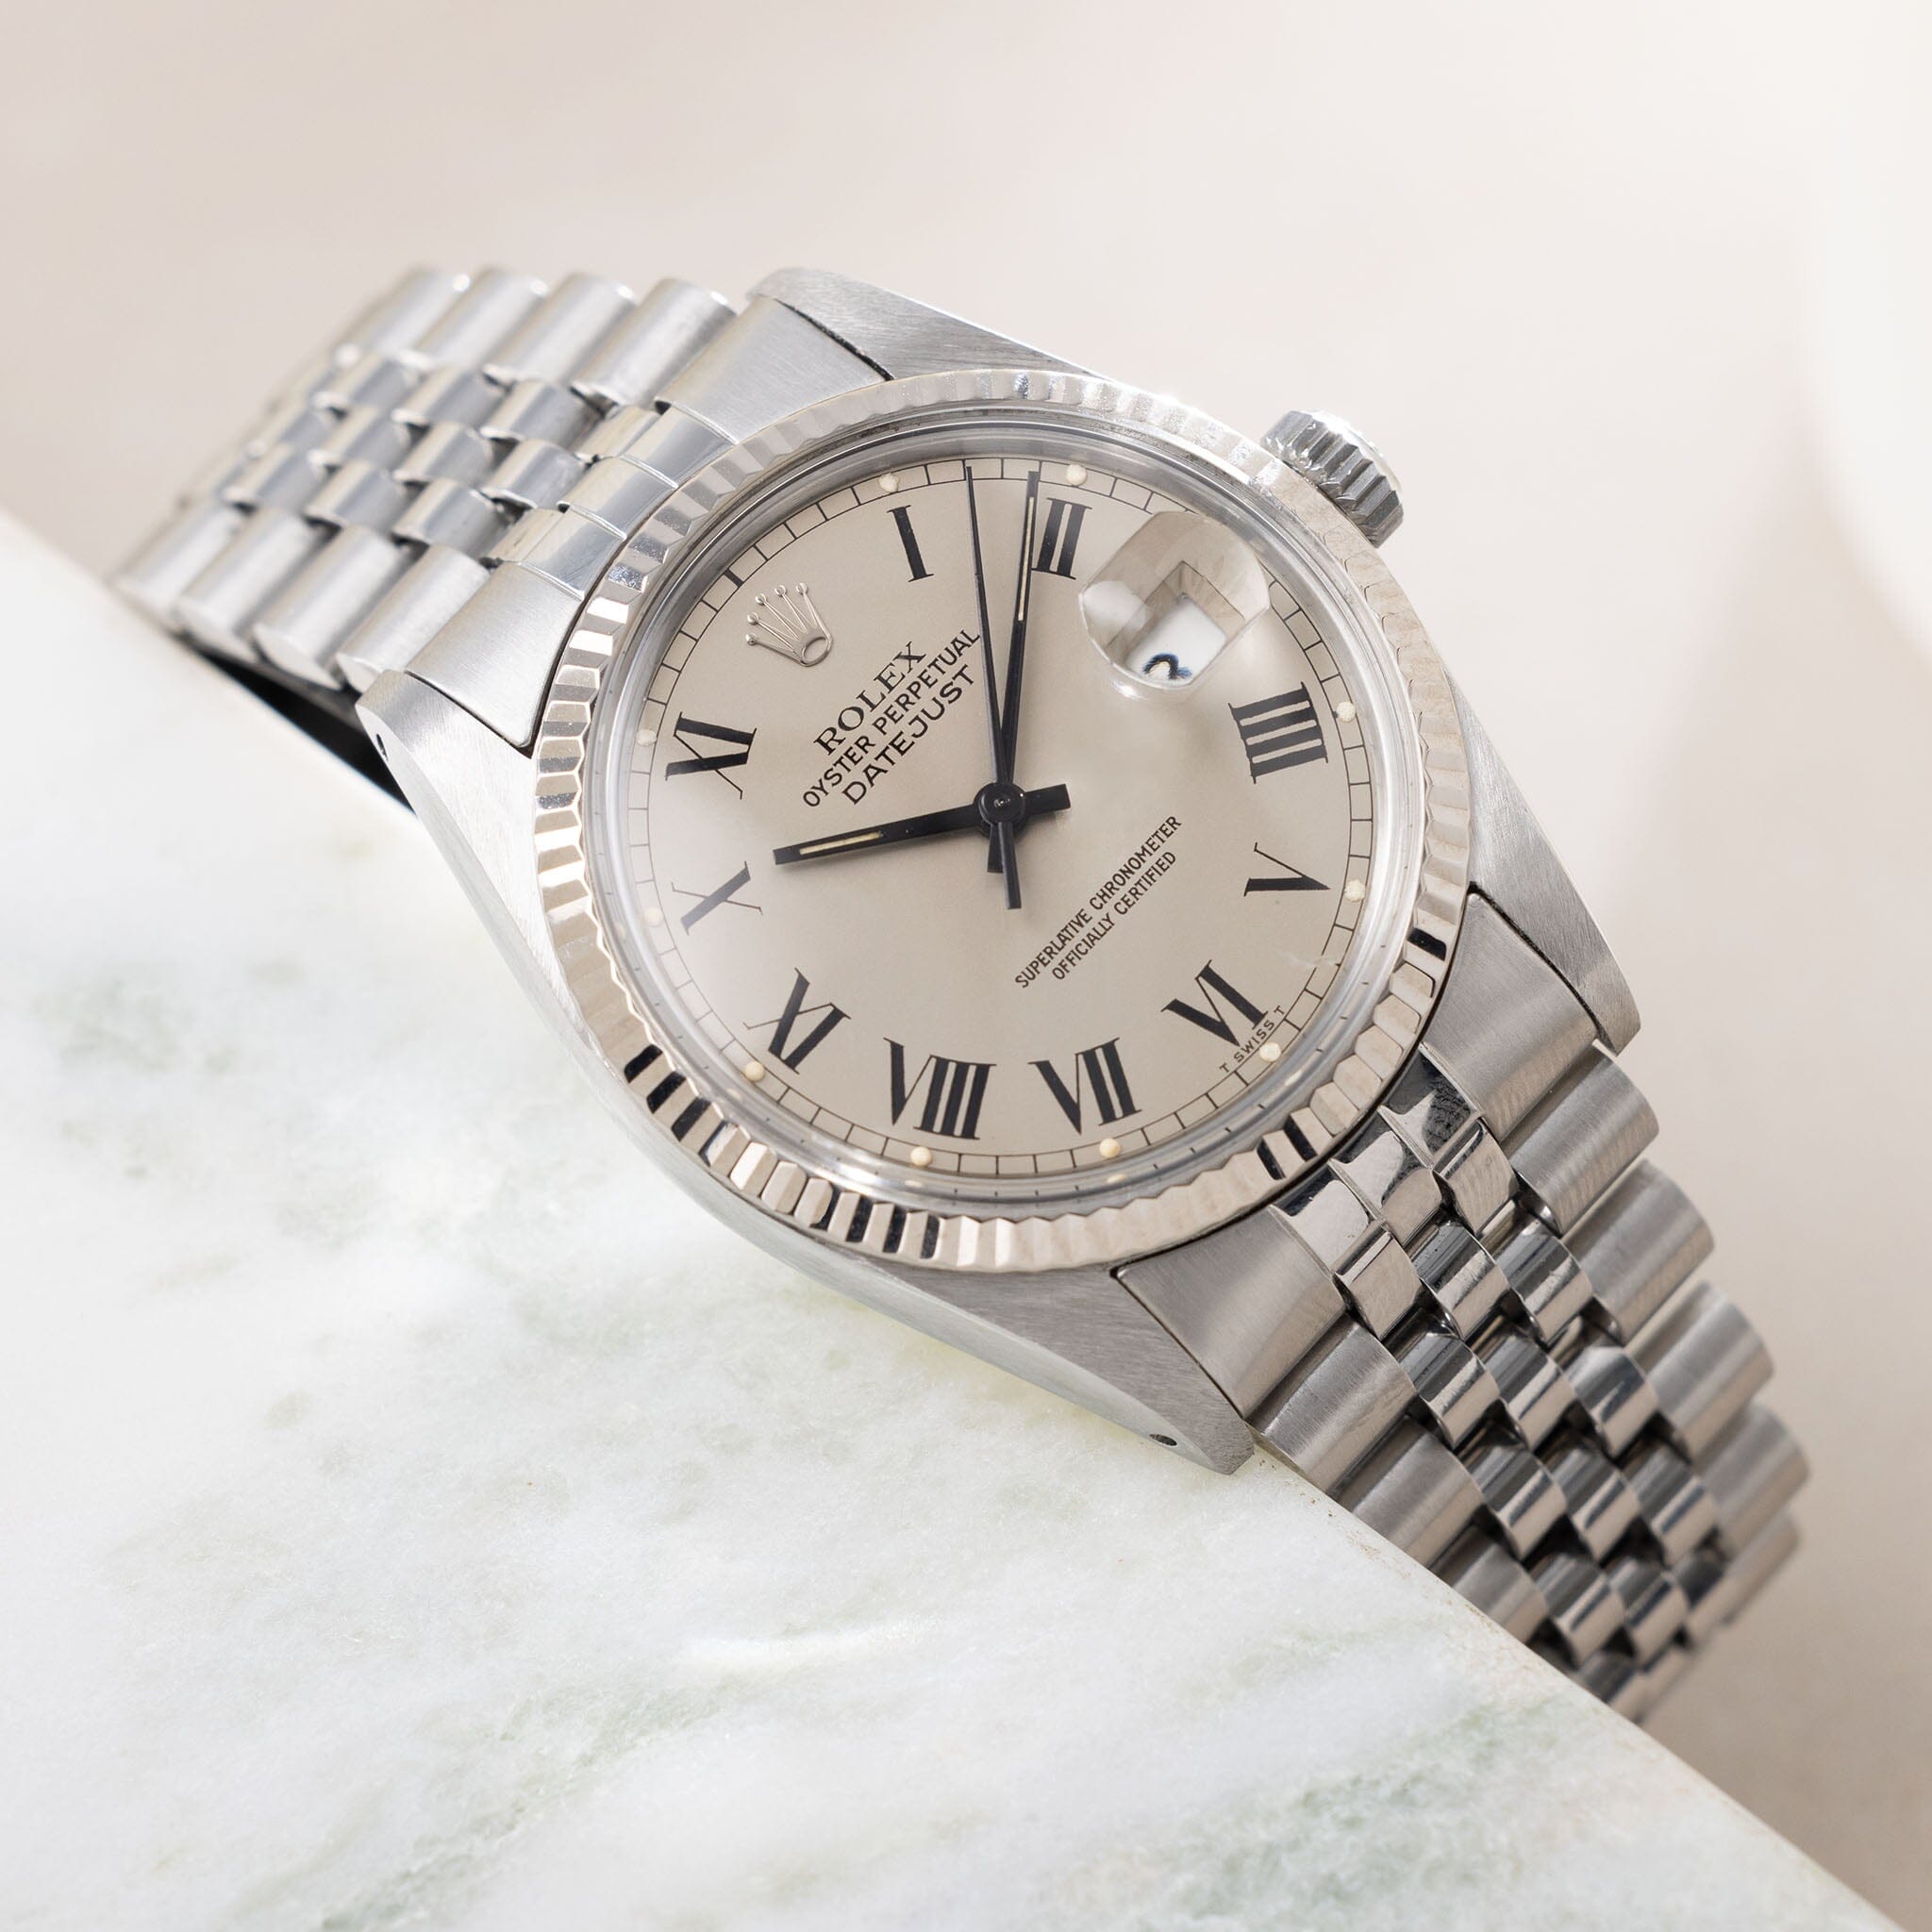 Rolex Datejust Reference 16014 rare Grey Buckley Dial